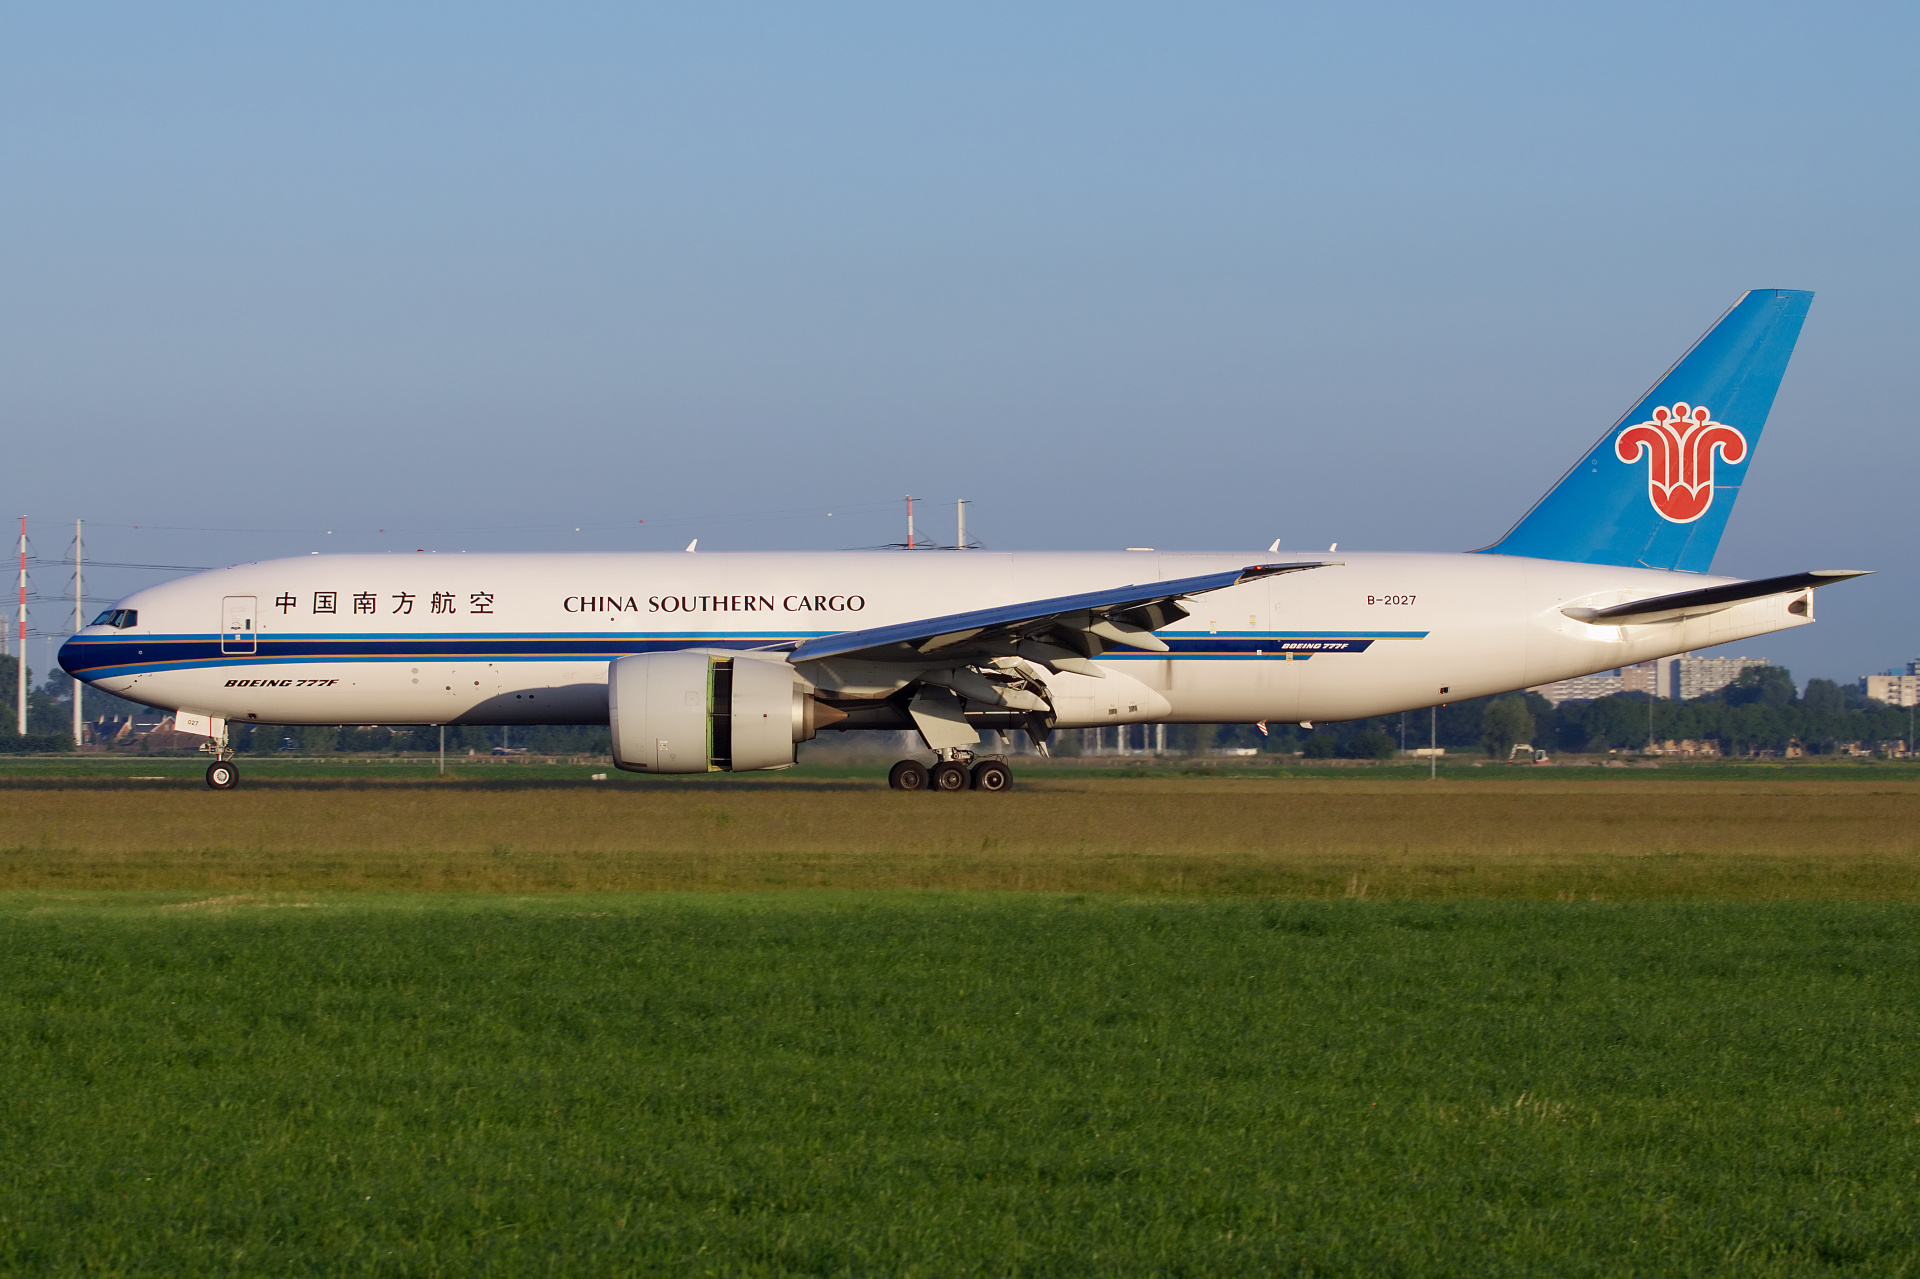 B-2027 (Aircraft » Schiphol Spotting » Boeing 777F » China Southern Cargo)